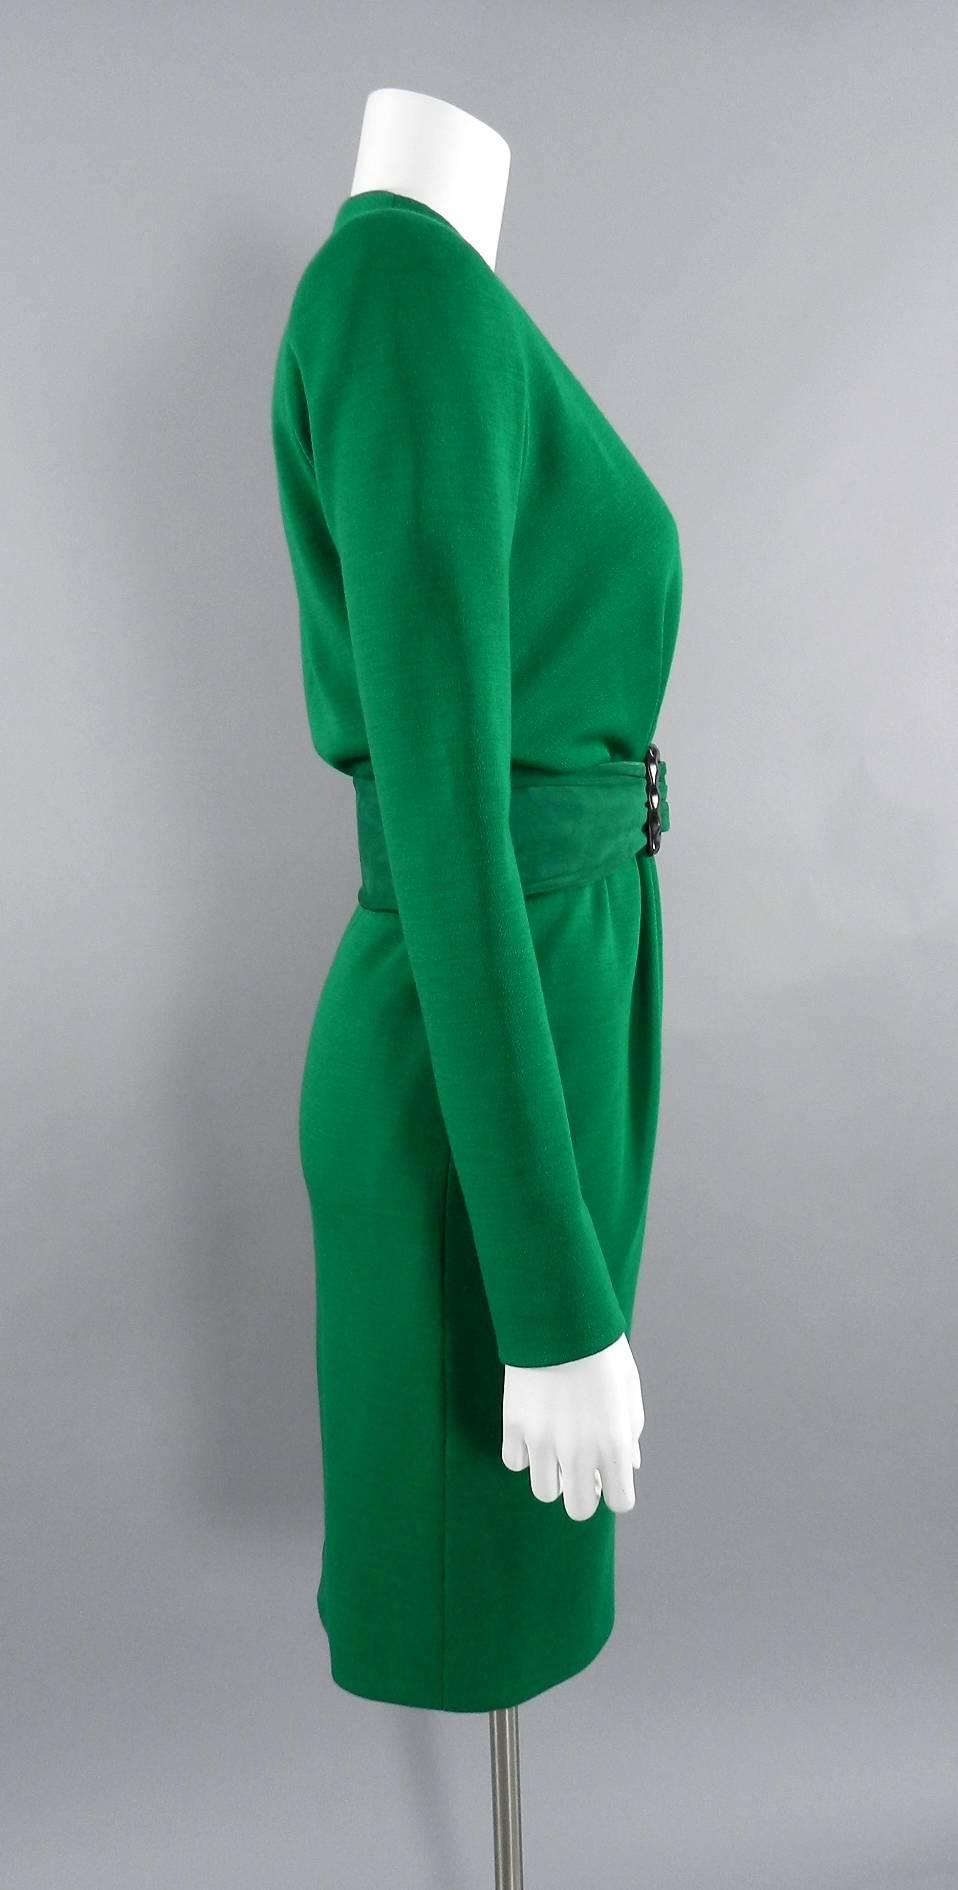 YSL Yves Saint Laurent Haute Couture Vintage 1990's Green Wool Knit Jersey Dress.  Fastens at centre front waist with hook and eye closures, zipper closures at wrists, matching suede belt with wood buckle.  Excellent clean pre-owned condition.  To